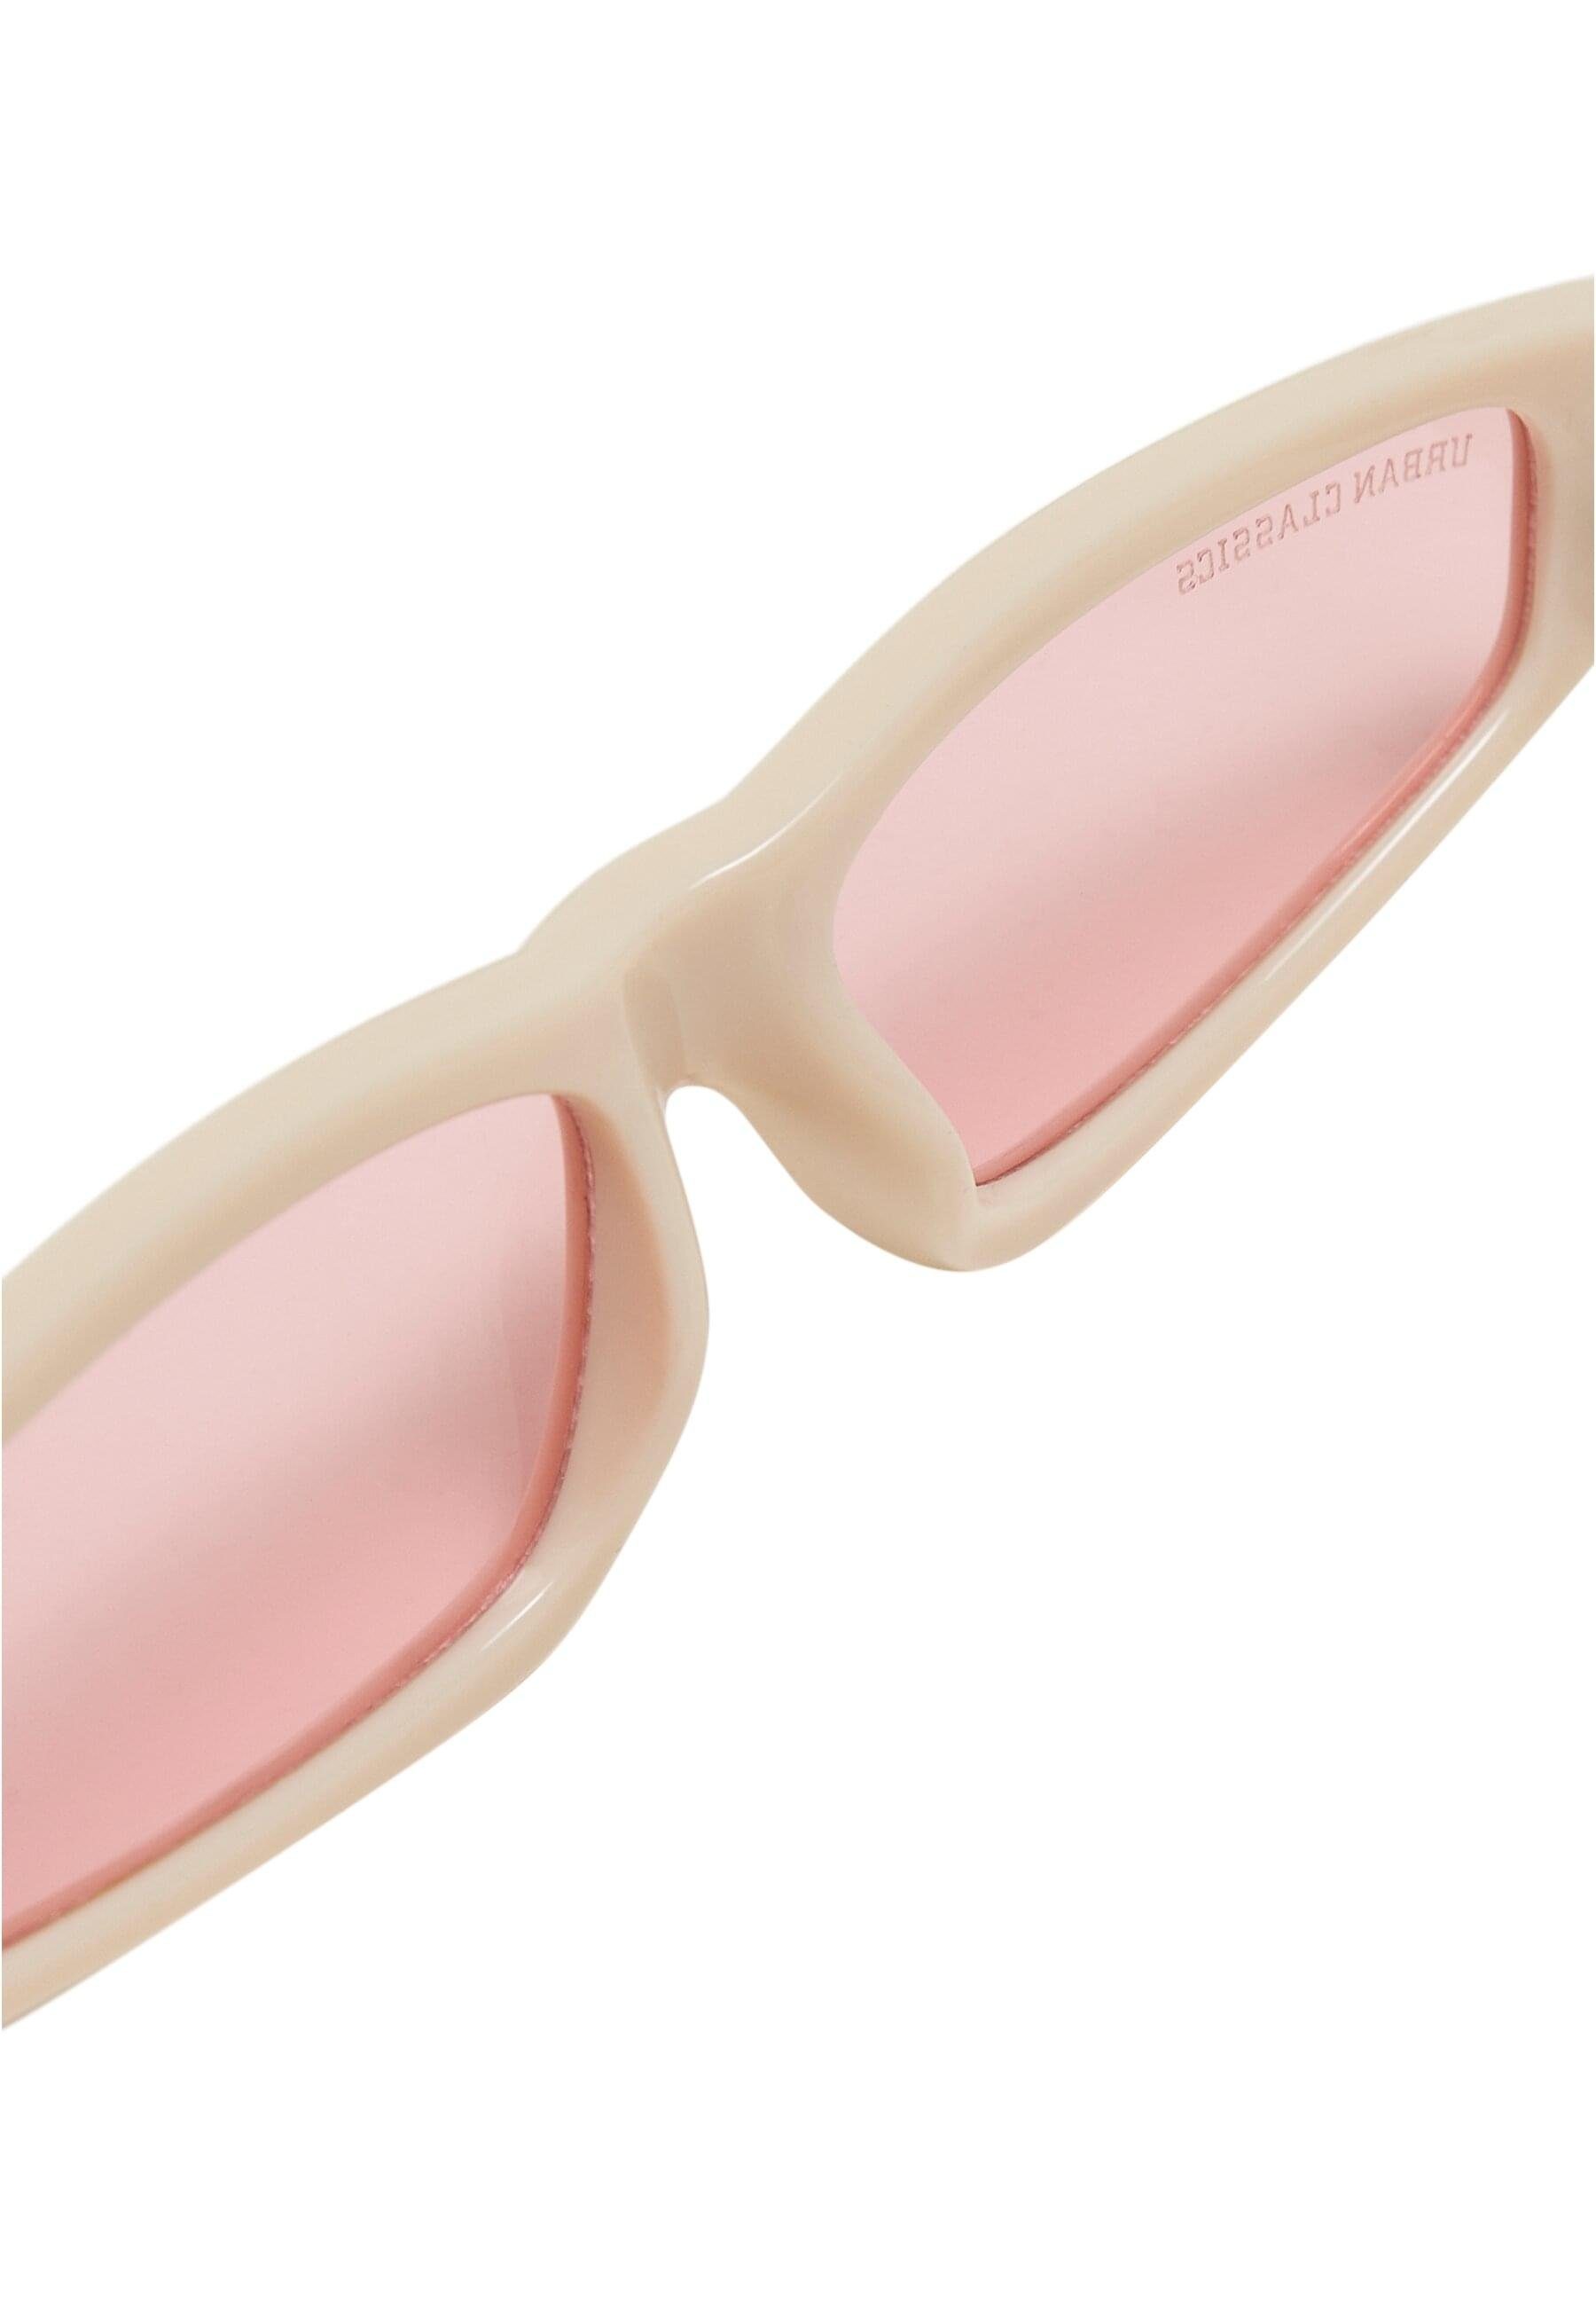 URBAN CLASSICS Sonnenbrille brown/brown+offwhite/pink 2-Pack Sunglasses Lefkada Unisex